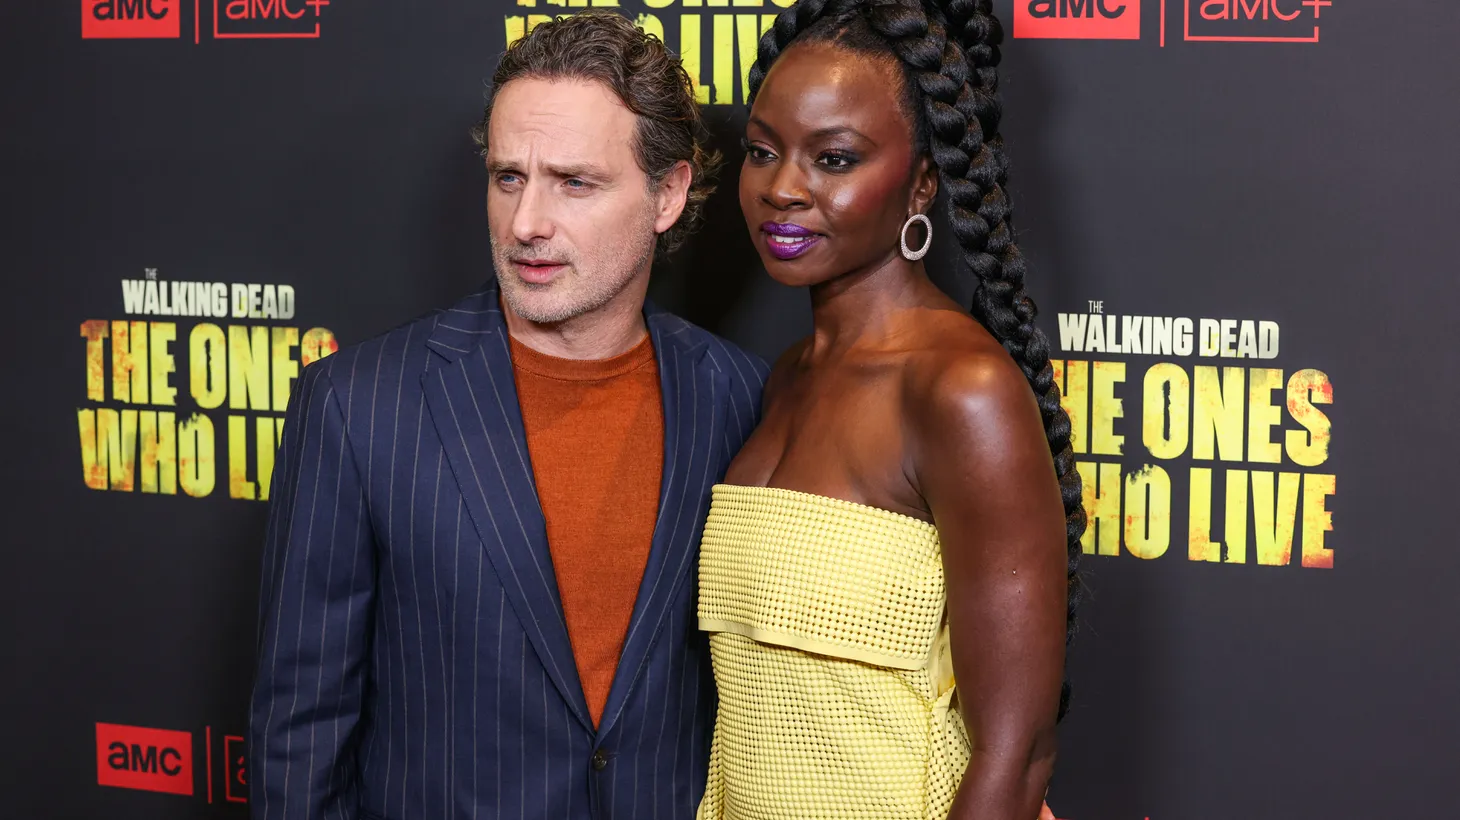 Andrew Lincoln and Danai Gurira arrive at the Los Angeles Premiere Of AMC+'s “The Walking Dead: The Ones Who Live” Season 1 held at the Linwood Dunn Theater at the Pickford Center for Motion Picture Study on February 7, 2024.